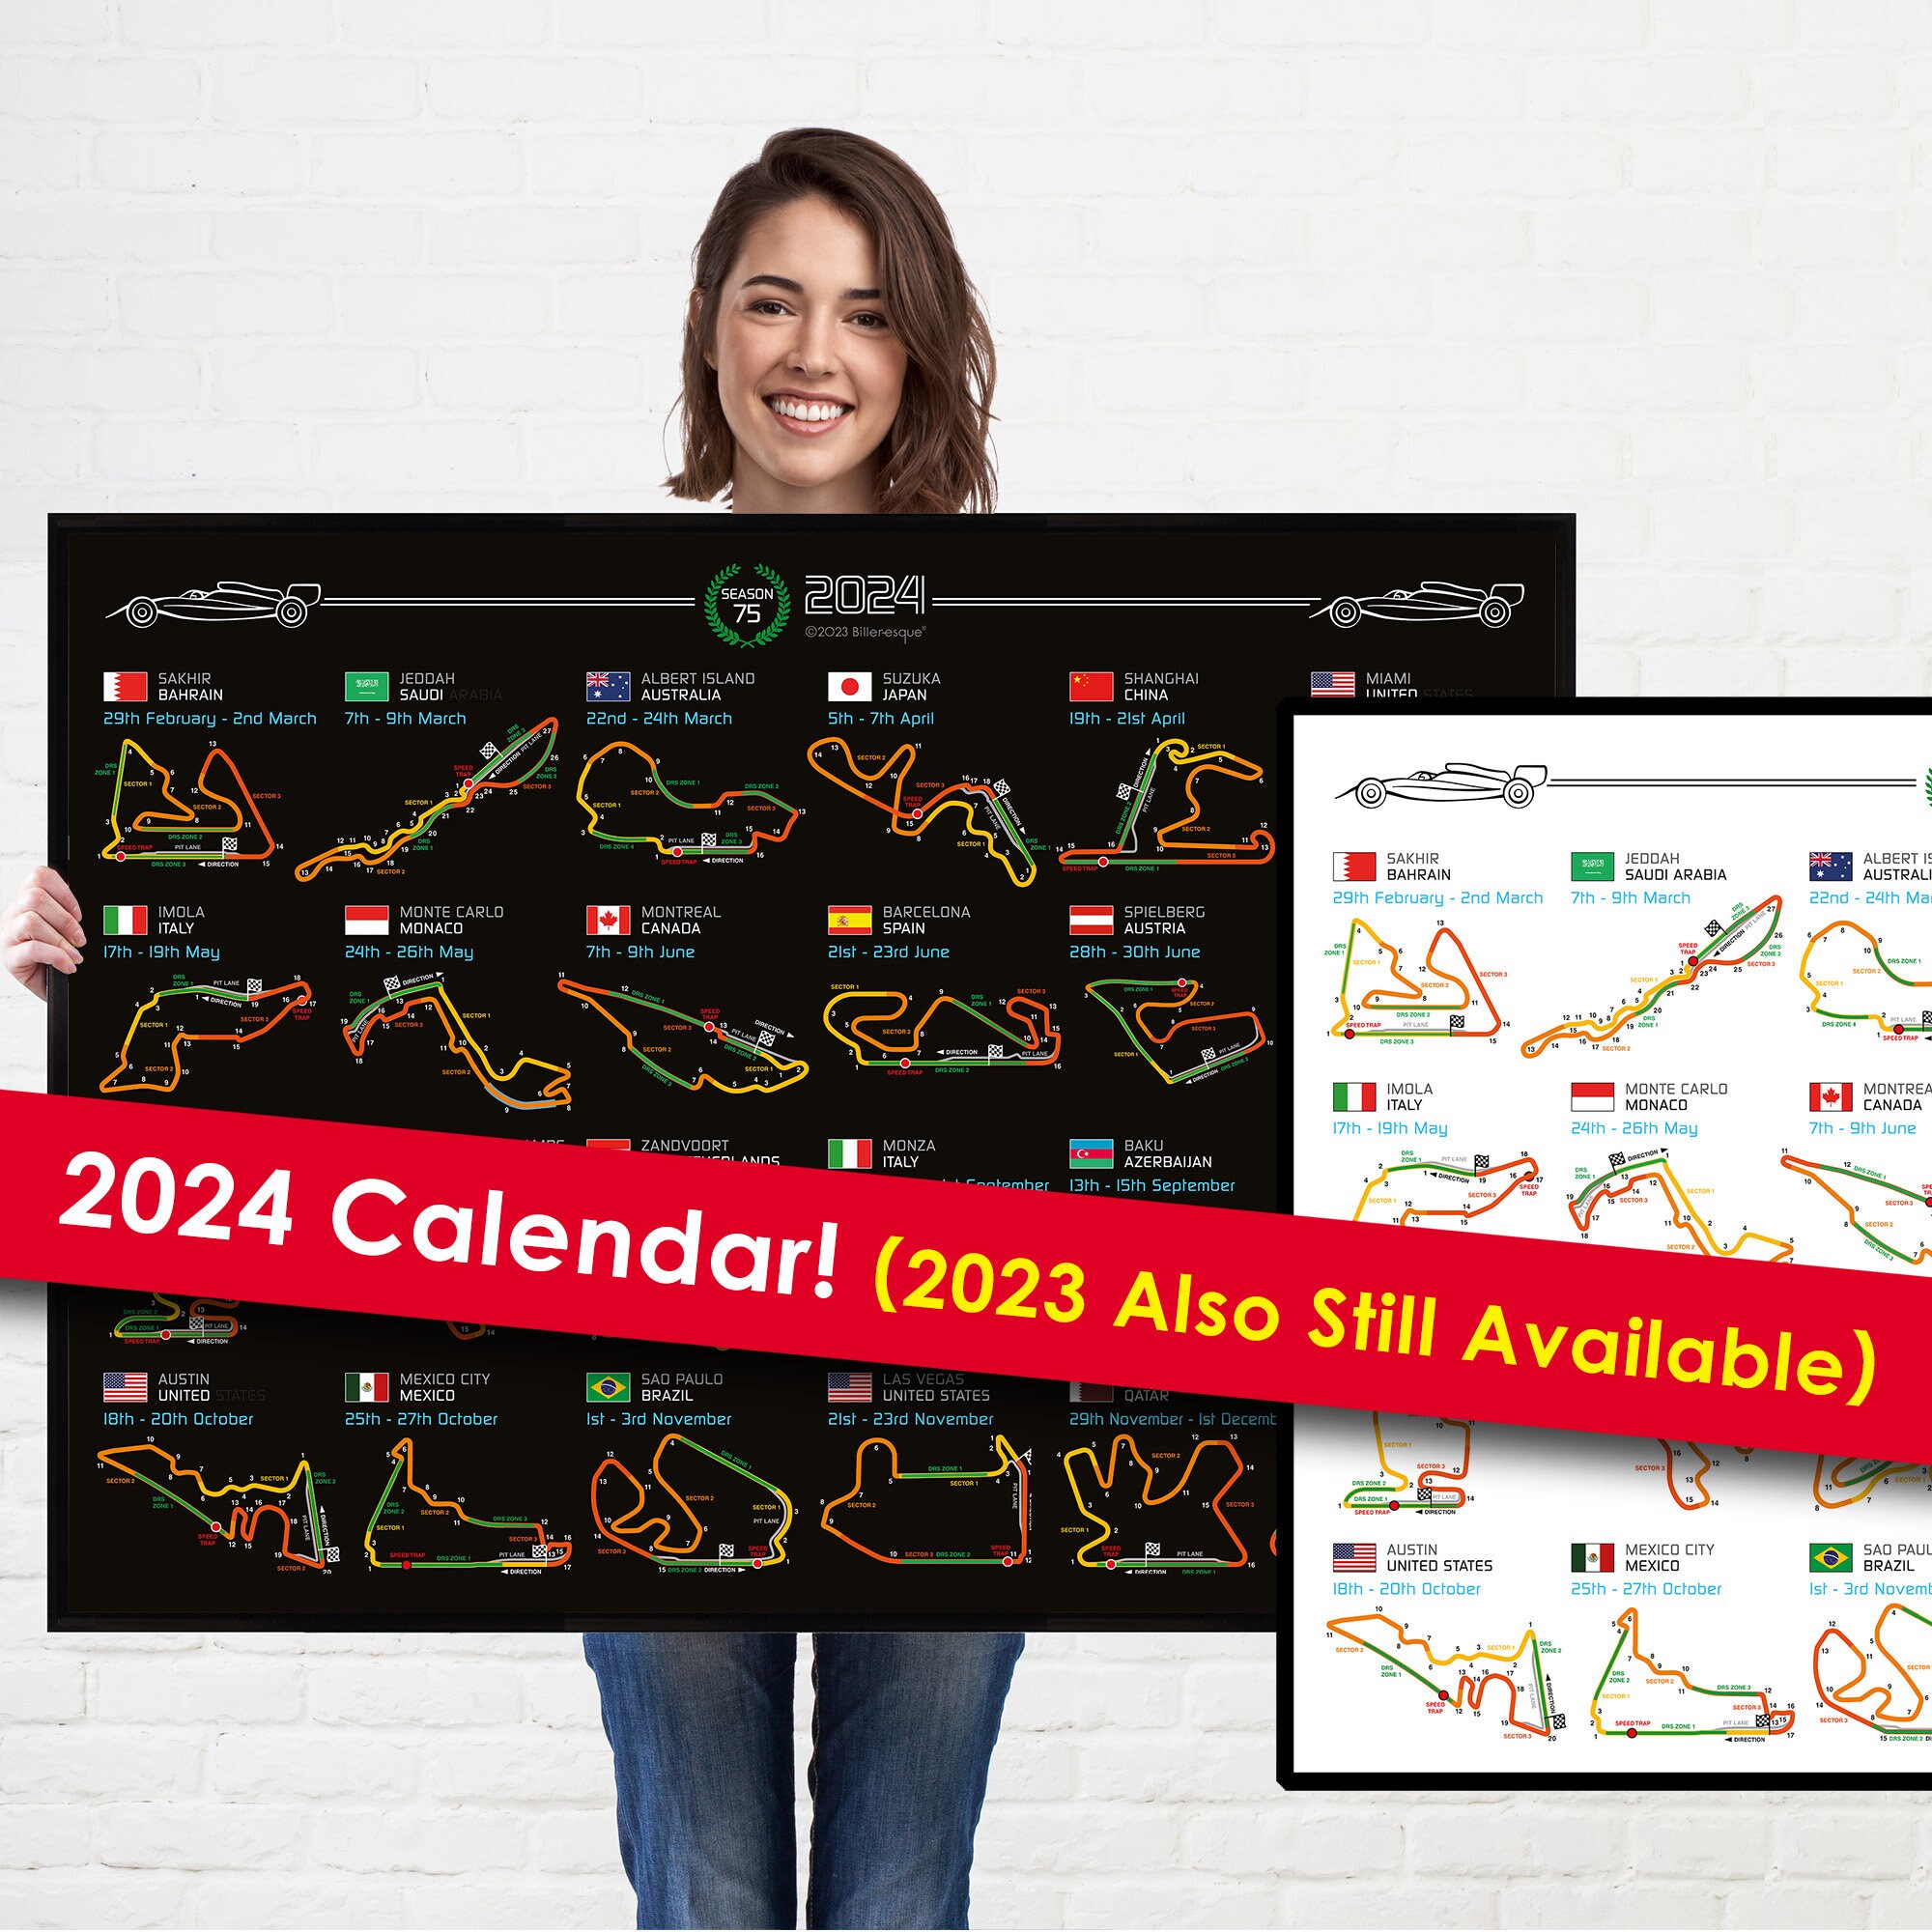 Assassins Creed Calendar 2023 Monthly Wall Hanging Calendars Video Game  Gaming Valhalla Merchandise Large Planner 24 Months - Full 2023 Write On  Grid Plus Bonus 2024 Preview Chart - Made In USA 